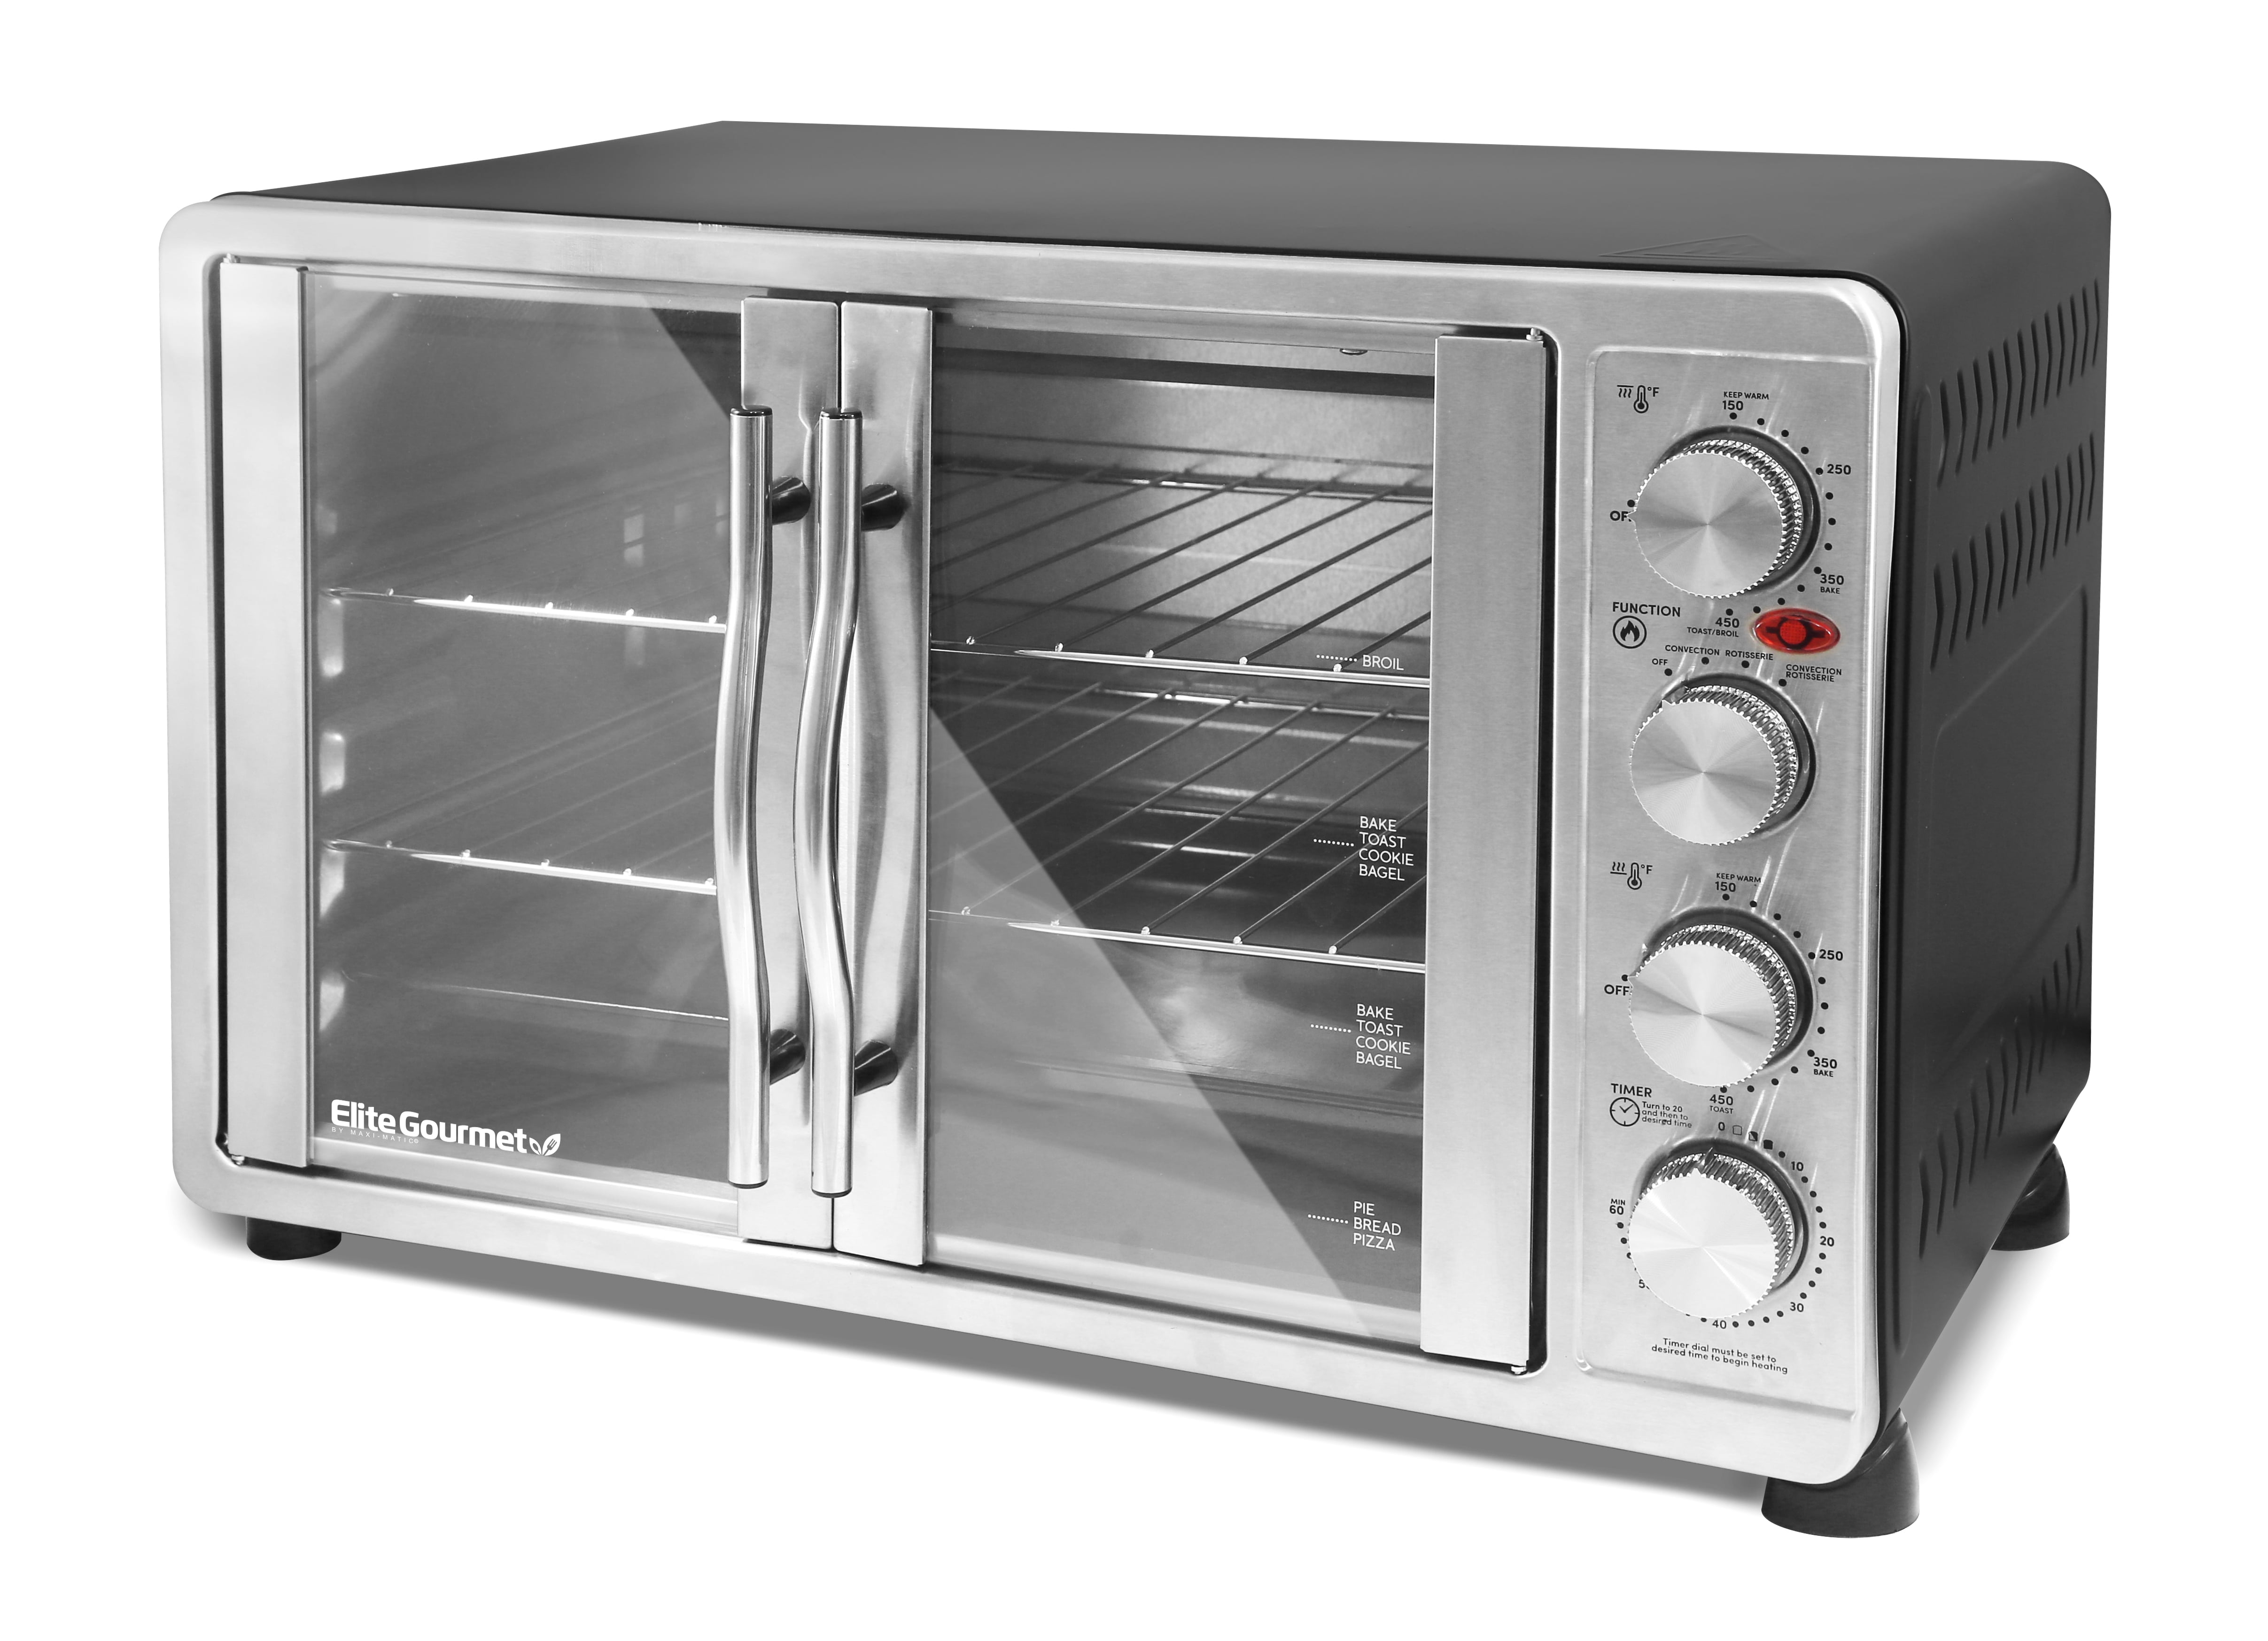 Sage rock Creation Elite Gourment ETO-4510M Double Door Oven with Rotisserie and Convection -  Walmart.com